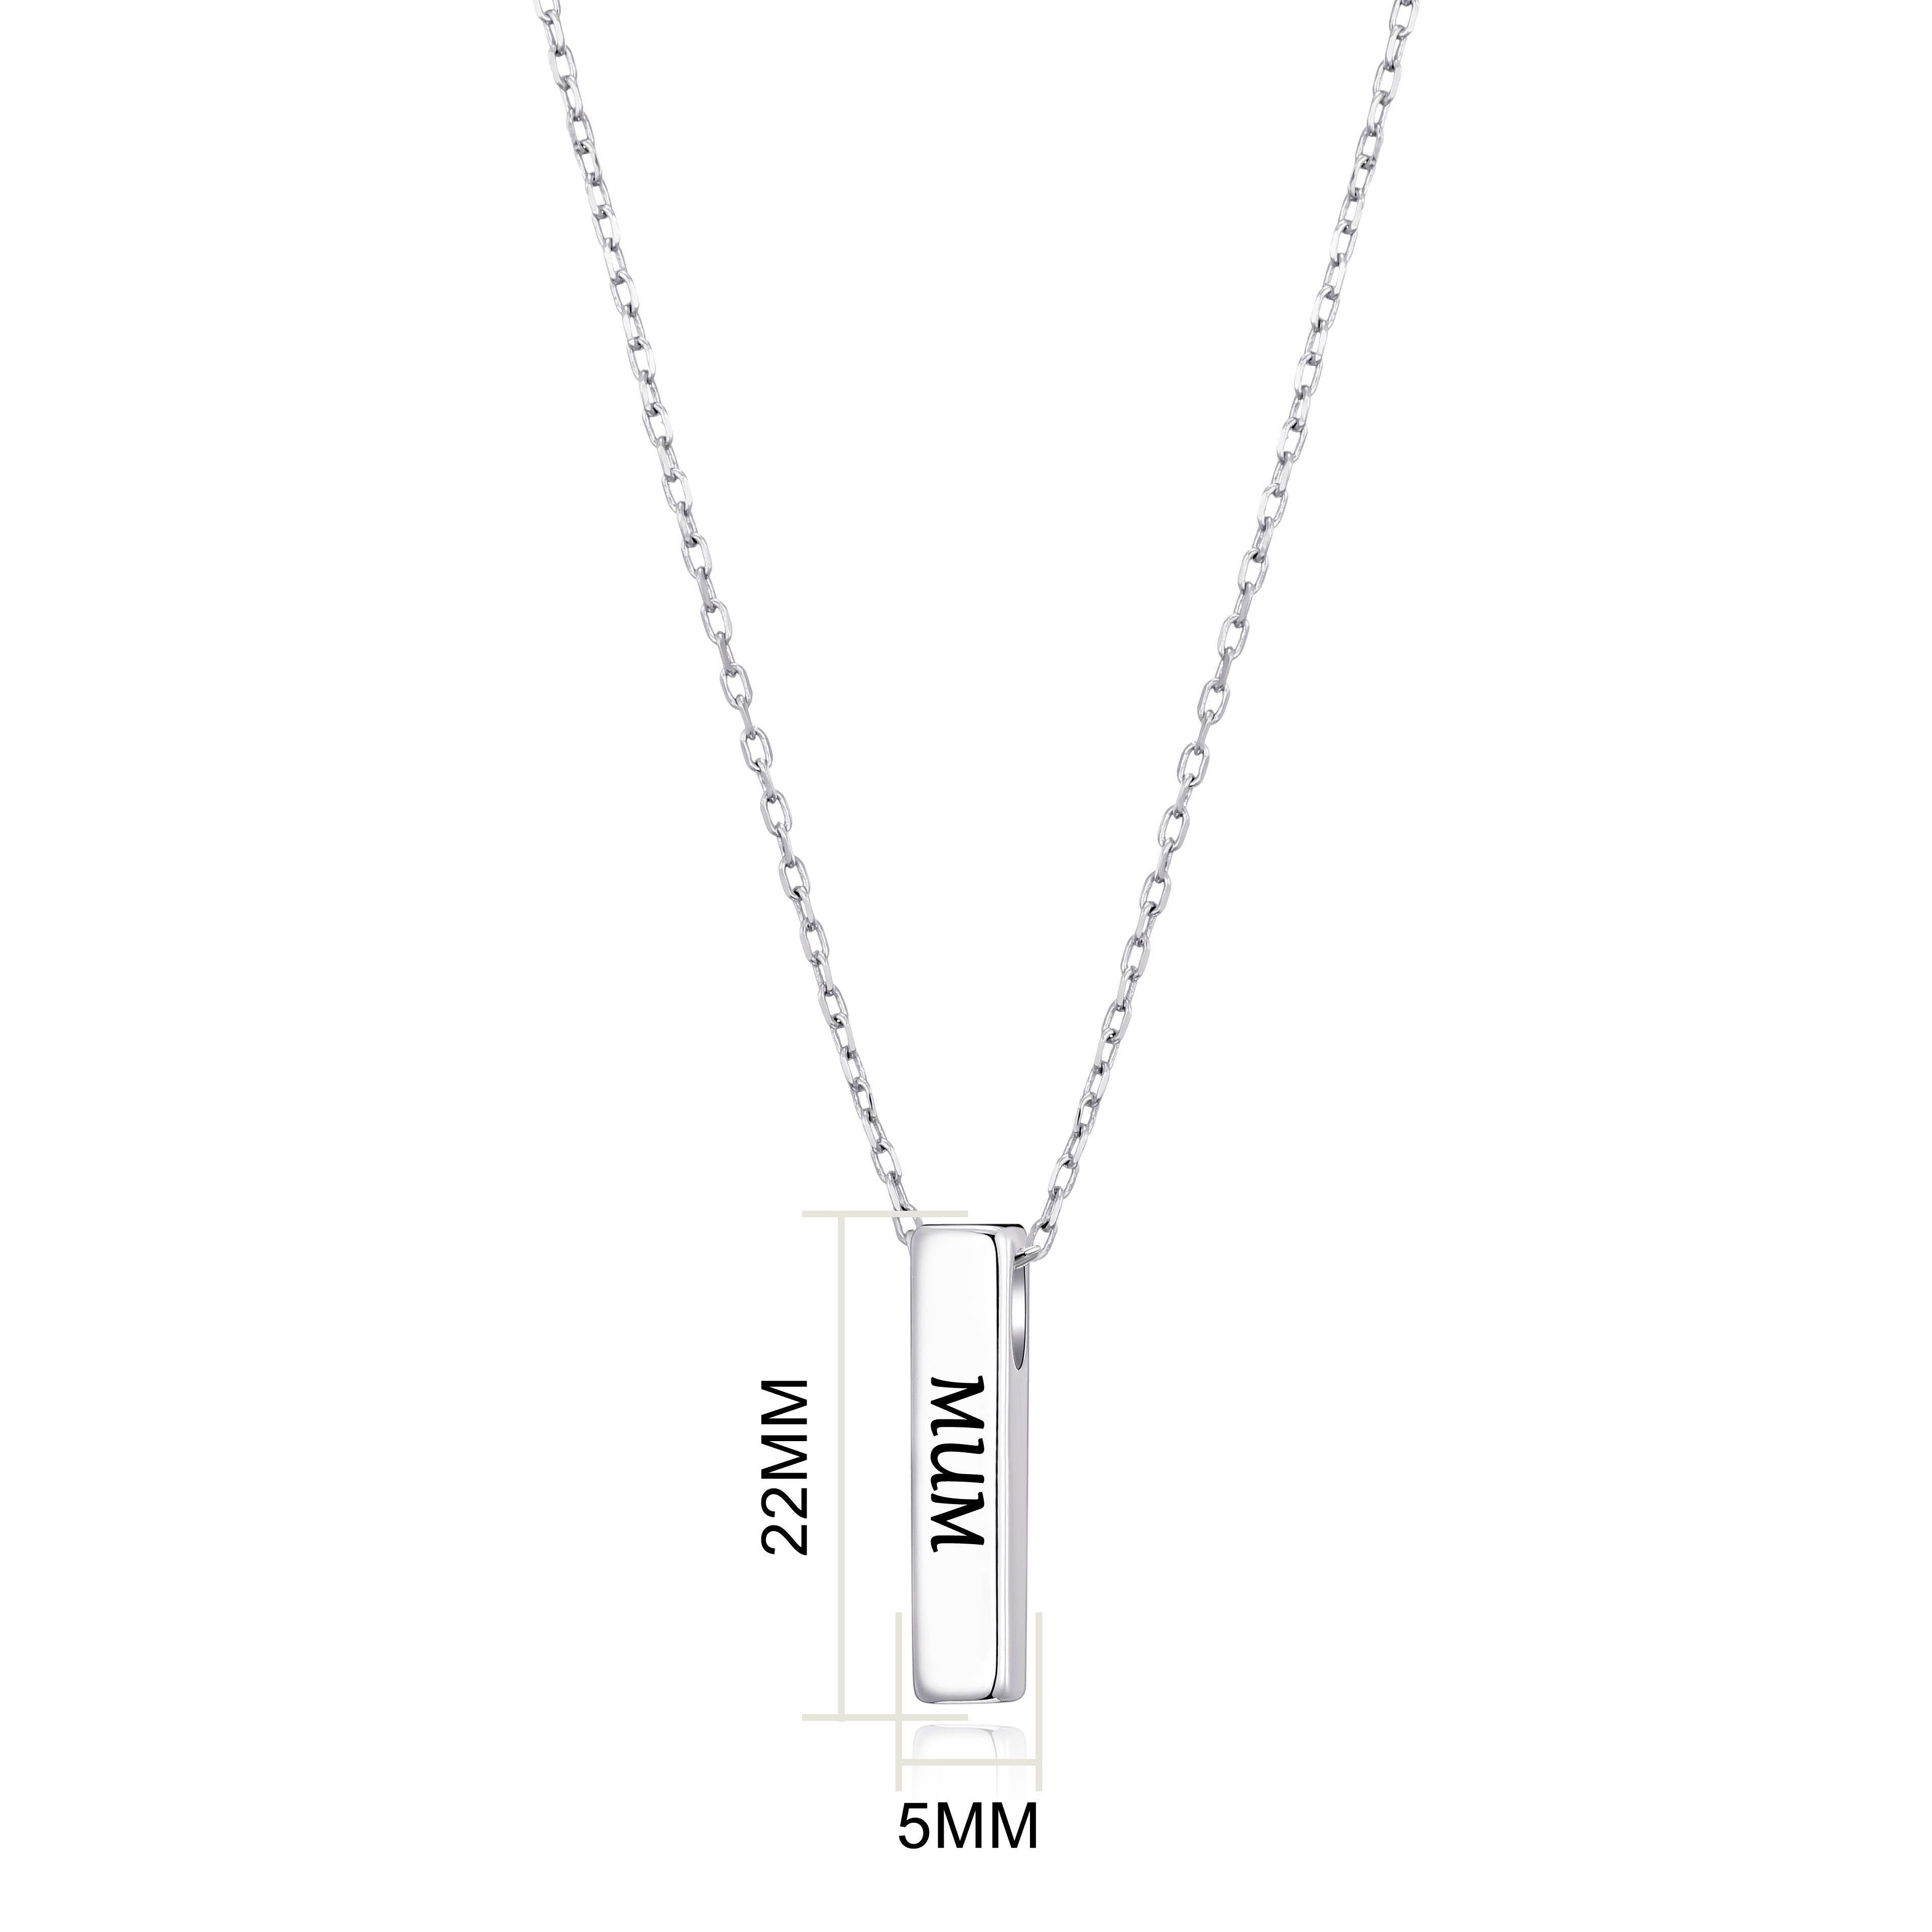 Silver Plated Mum Bar Necklace